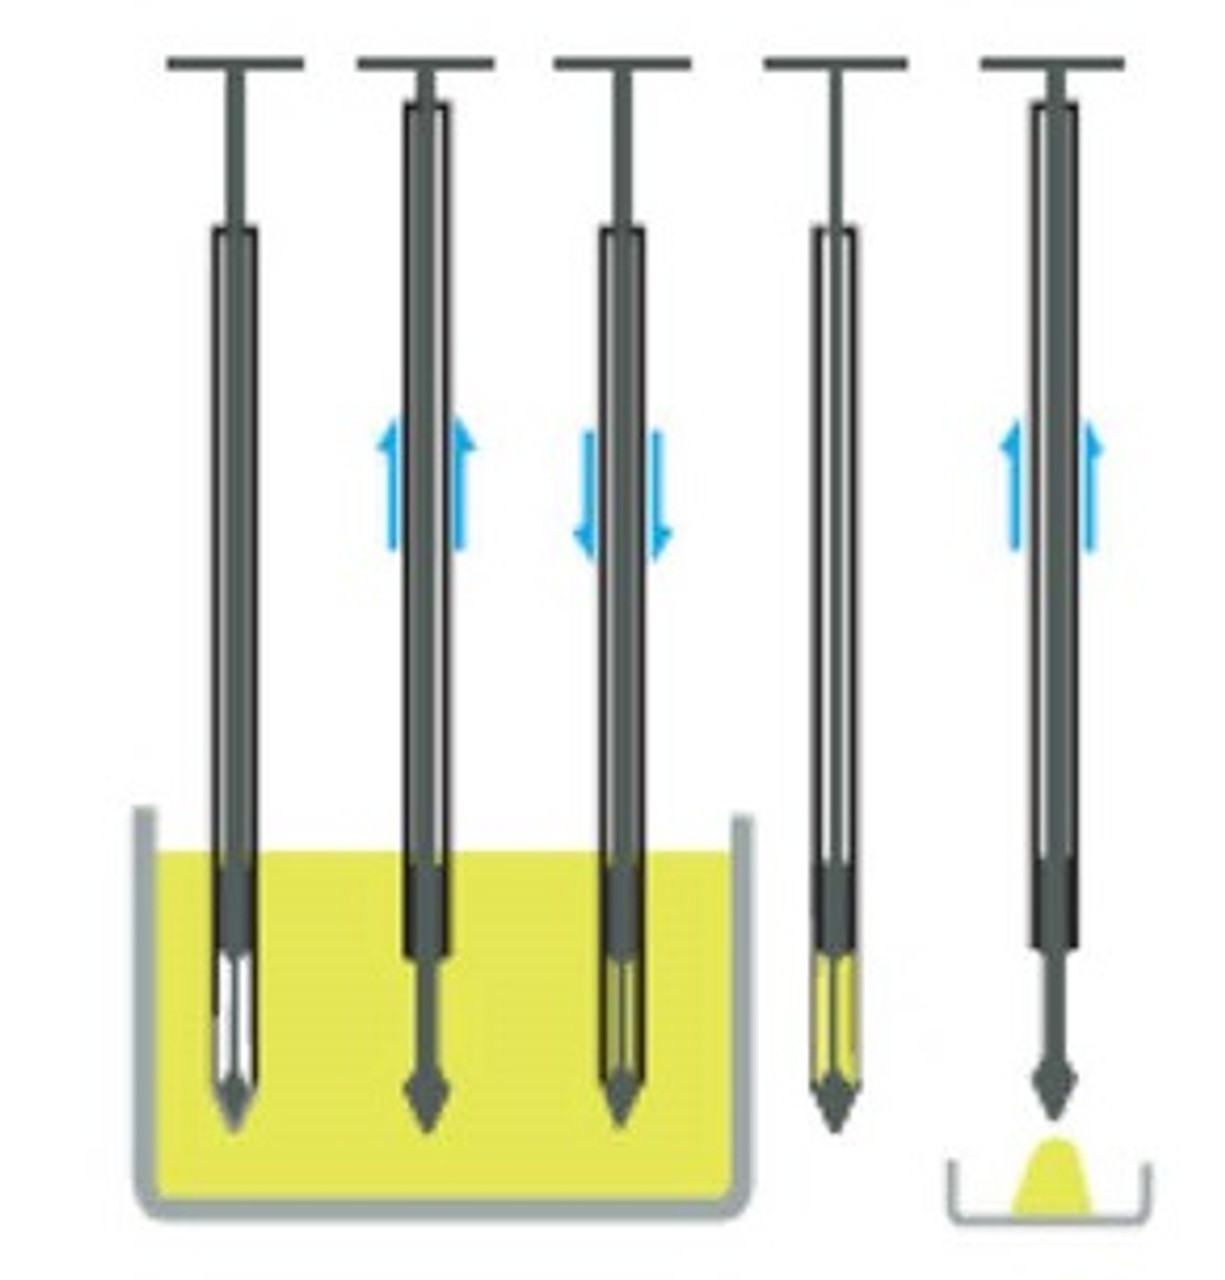 Operation
1. Insert the sampler into the product, ensure that the tip is
     inside the sampler body.
2. At the required depth pull up the body to expose the
     tip. Powder will fl ow in around the tip.
3. Push down body of the sampler to trap the sample.
4. Withdraw sampler.
5. Pull up body to release the sample.